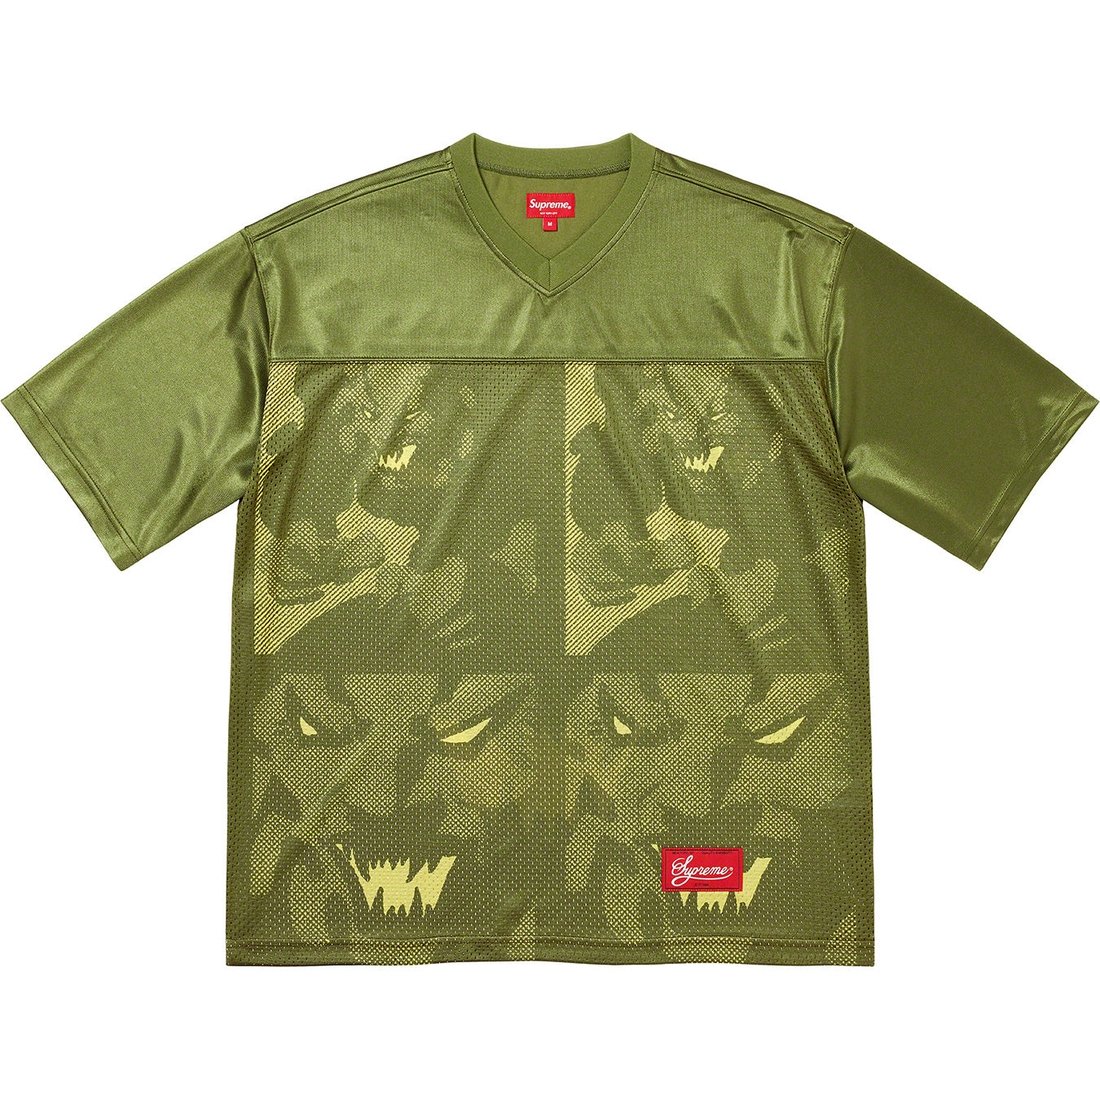 Details on Ronin Football Jersey Olive from spring summer 2023 (Price is $128)